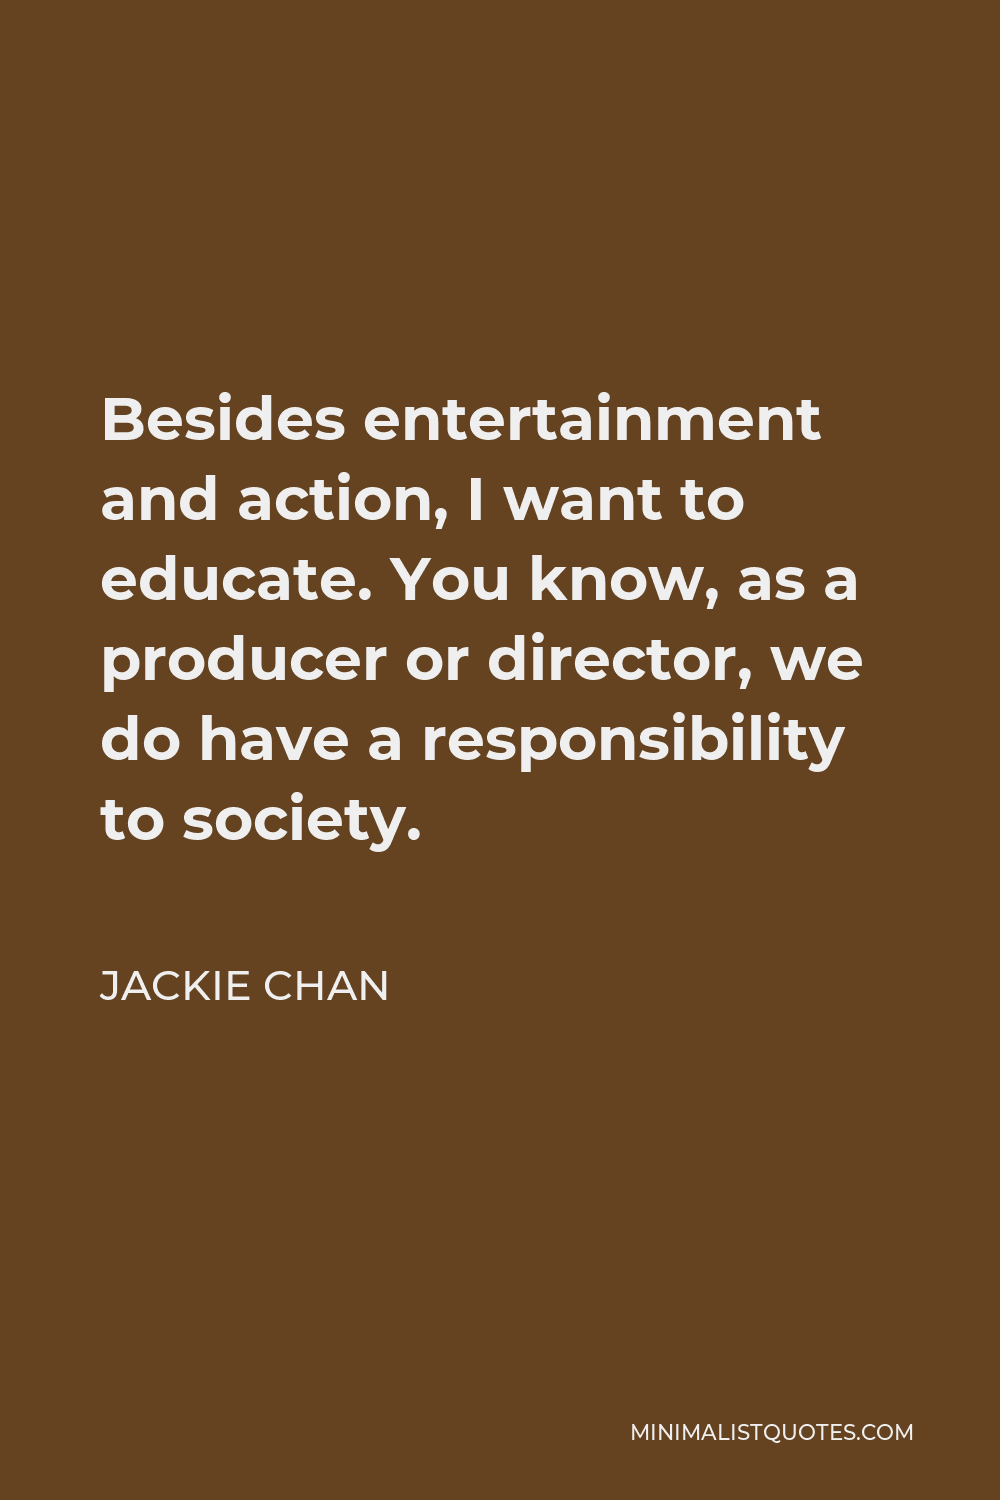 Jackie Chan Quote - Besides entertainment and action, I want to educate. You know, as a producer or director, we do have a responsibility to society.